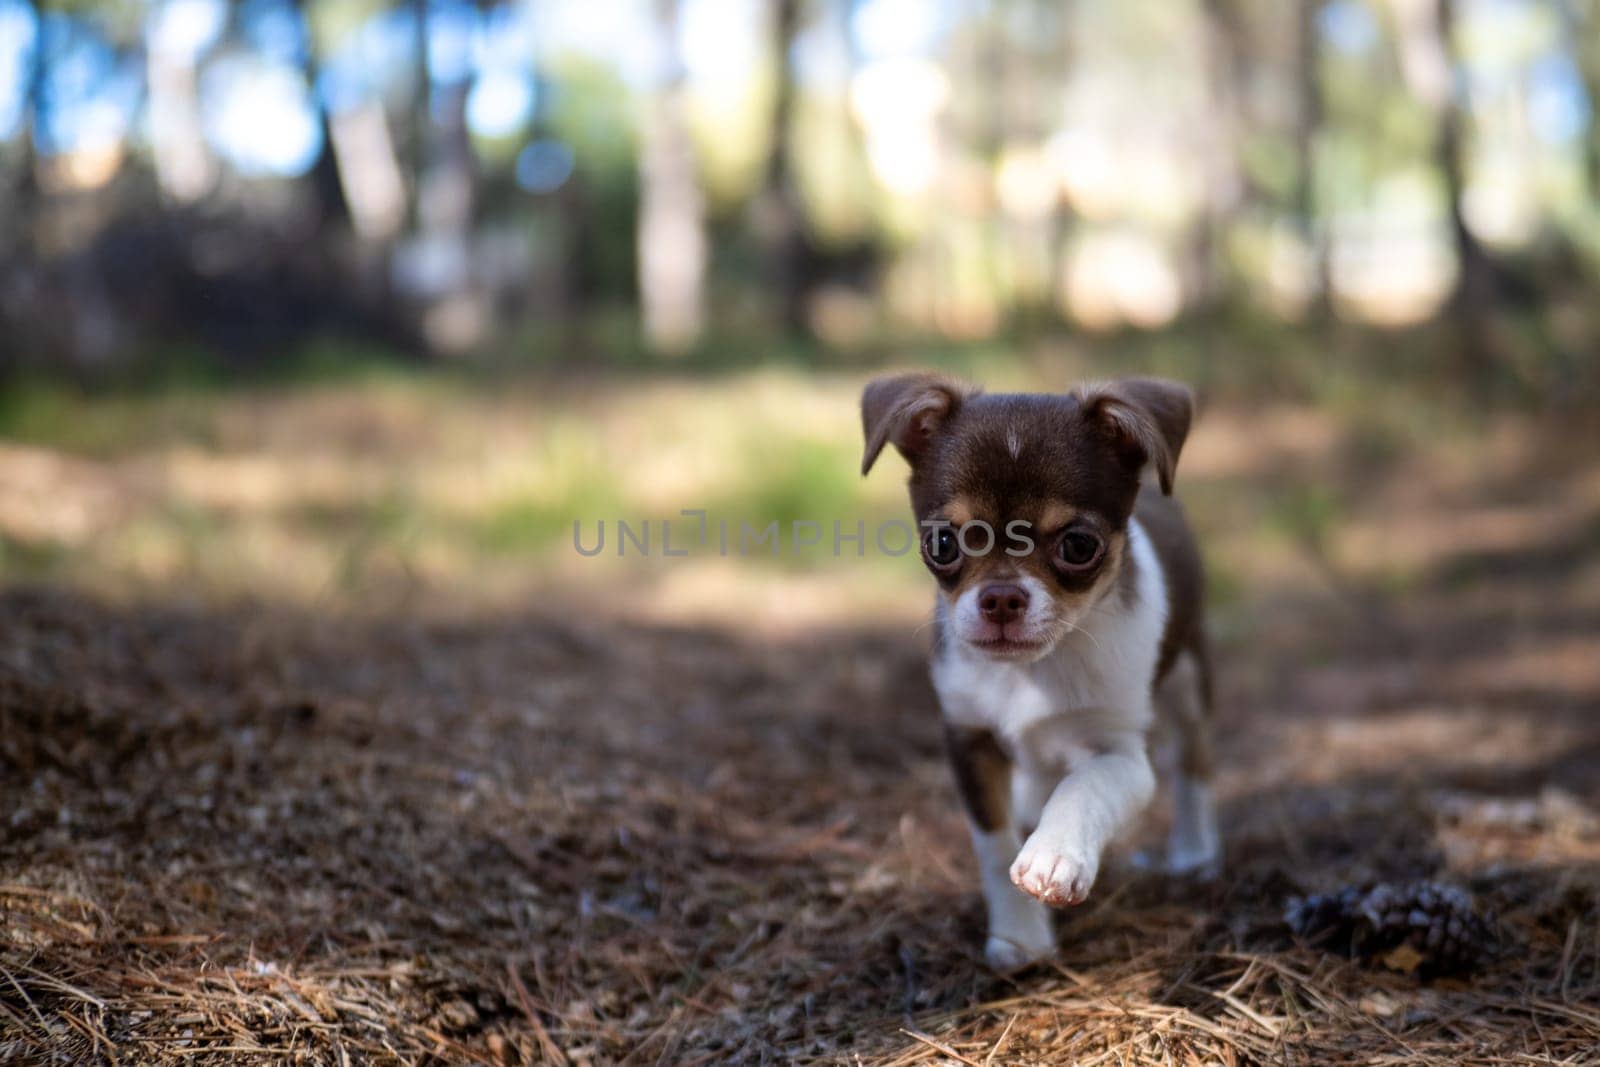 Little Chihuahua's Forest Wanderlust by gcm